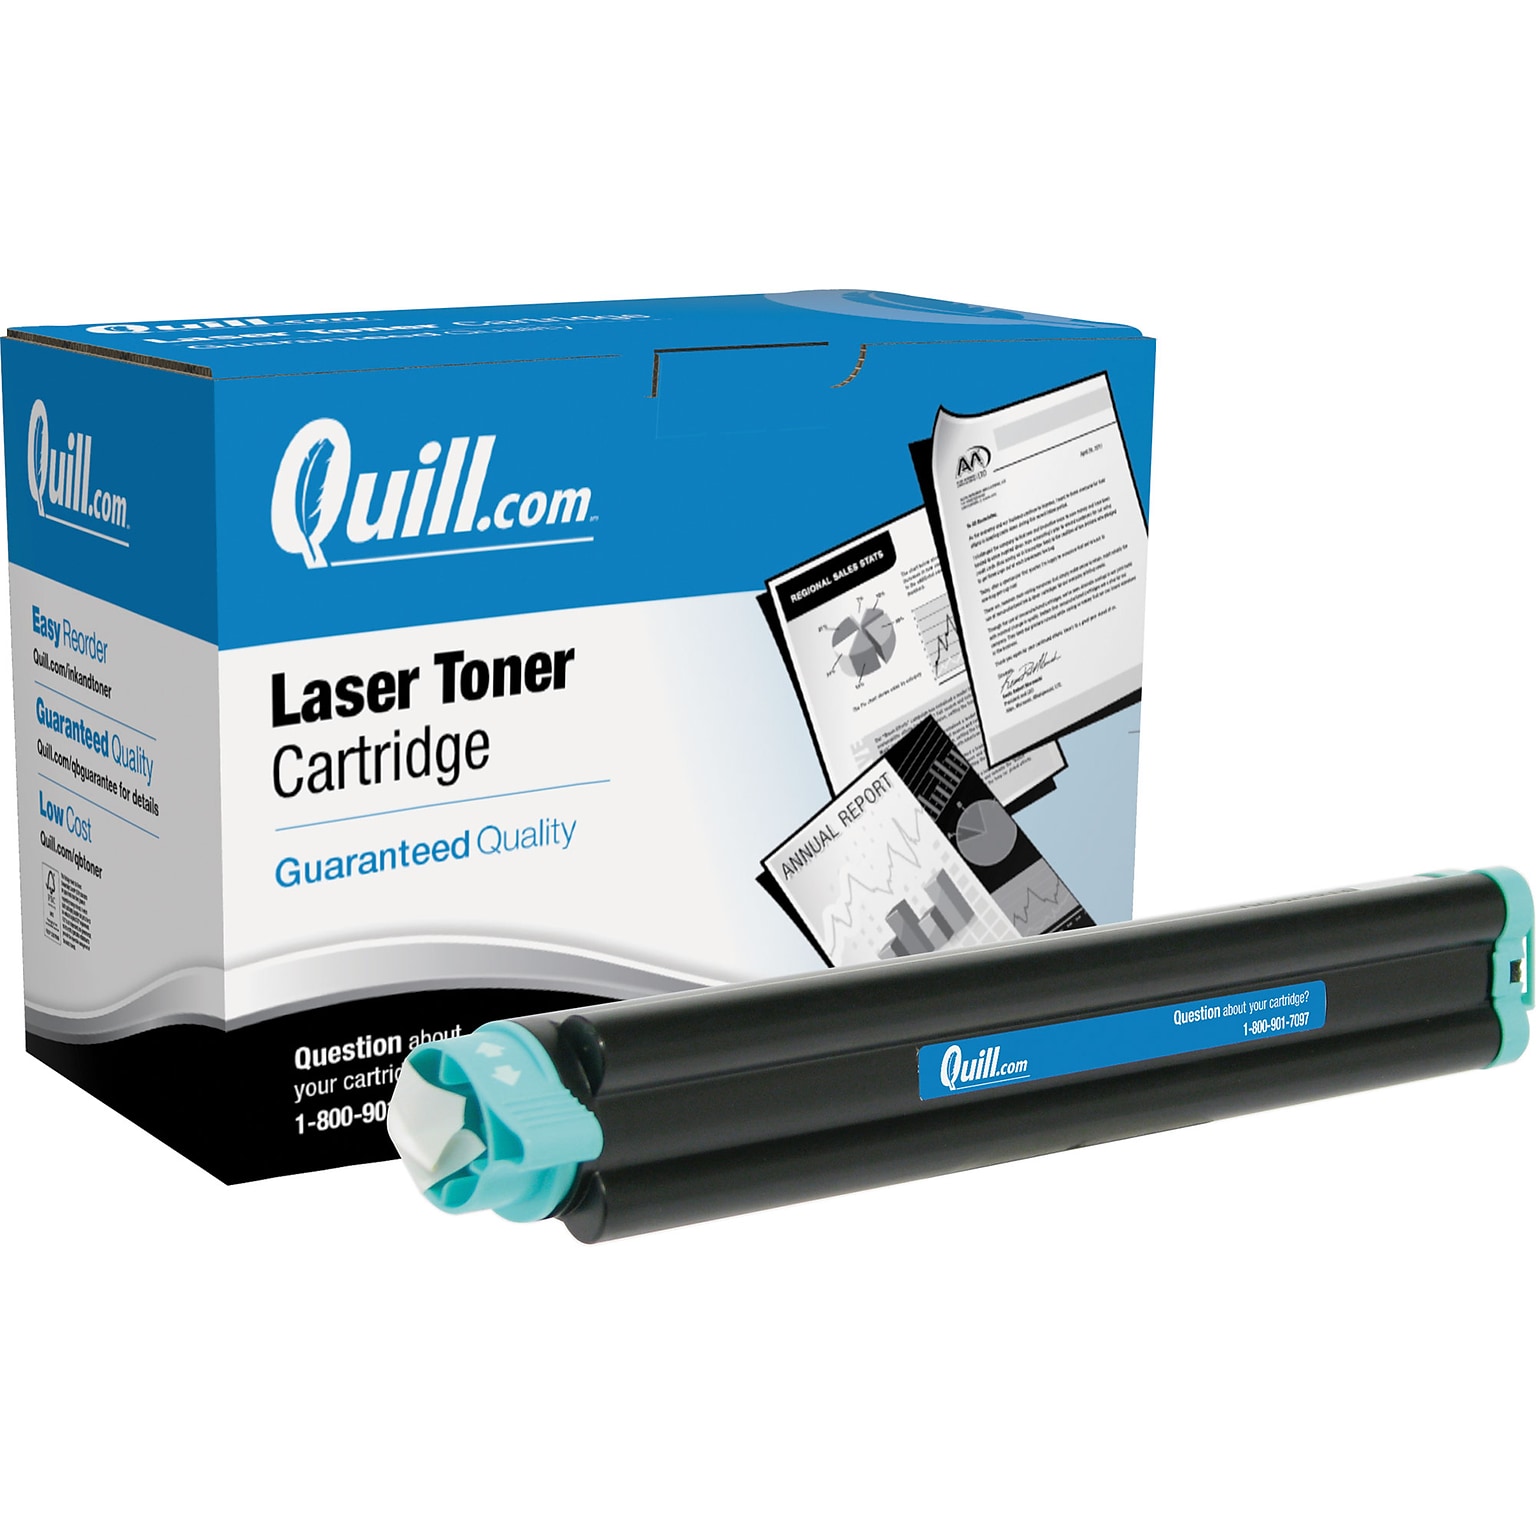 Quill Brand Black Standard Yield Laser Toner Cartridge Replacement for OKI 43502301 (Lifetime Warranty)